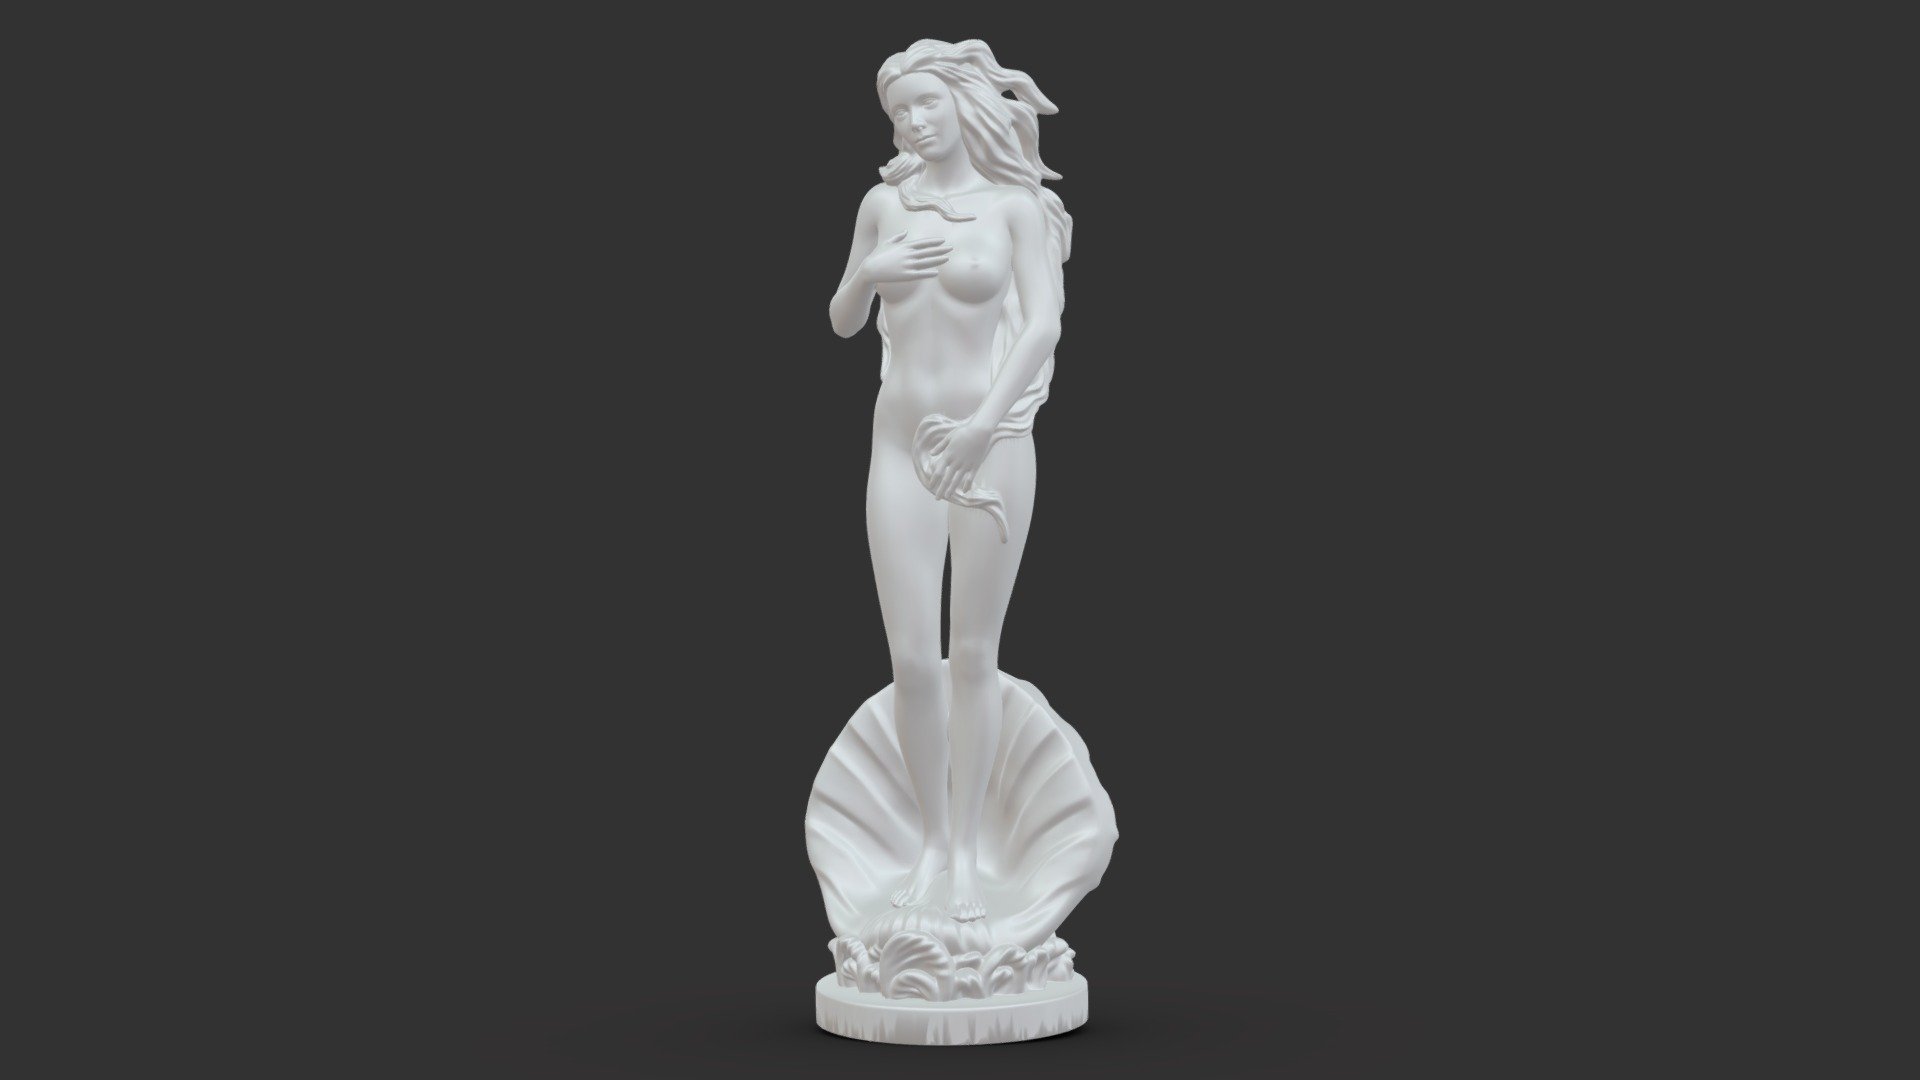 We provide unique 3d scanned models with realistic proportions for closeup and medium-distance views in artworks, paintings and classes. As well as architectural visualization projects.

Main features:




high-end realistic 3d scanned model;

realistic proportions;

highest quality;

low price;

saves you time for more time in landscaping and interiors visualization.

FEATURES 




3d scanned model 

Extremely clean

Edge Loops based

smoothable

symmetrical

professional quality UV map

high level of detail

high resolution textures

real-world scale

system unit: cm

TEXTURES 




Textural Resolution: 4096 x 4096

Color Map

The model is suitable for stereolithography 3d printing 

The model is also ready for fullcolour 3d printing - 001162 afrodita - Buy Royalty Free 3D model by 3DFarm 3d model